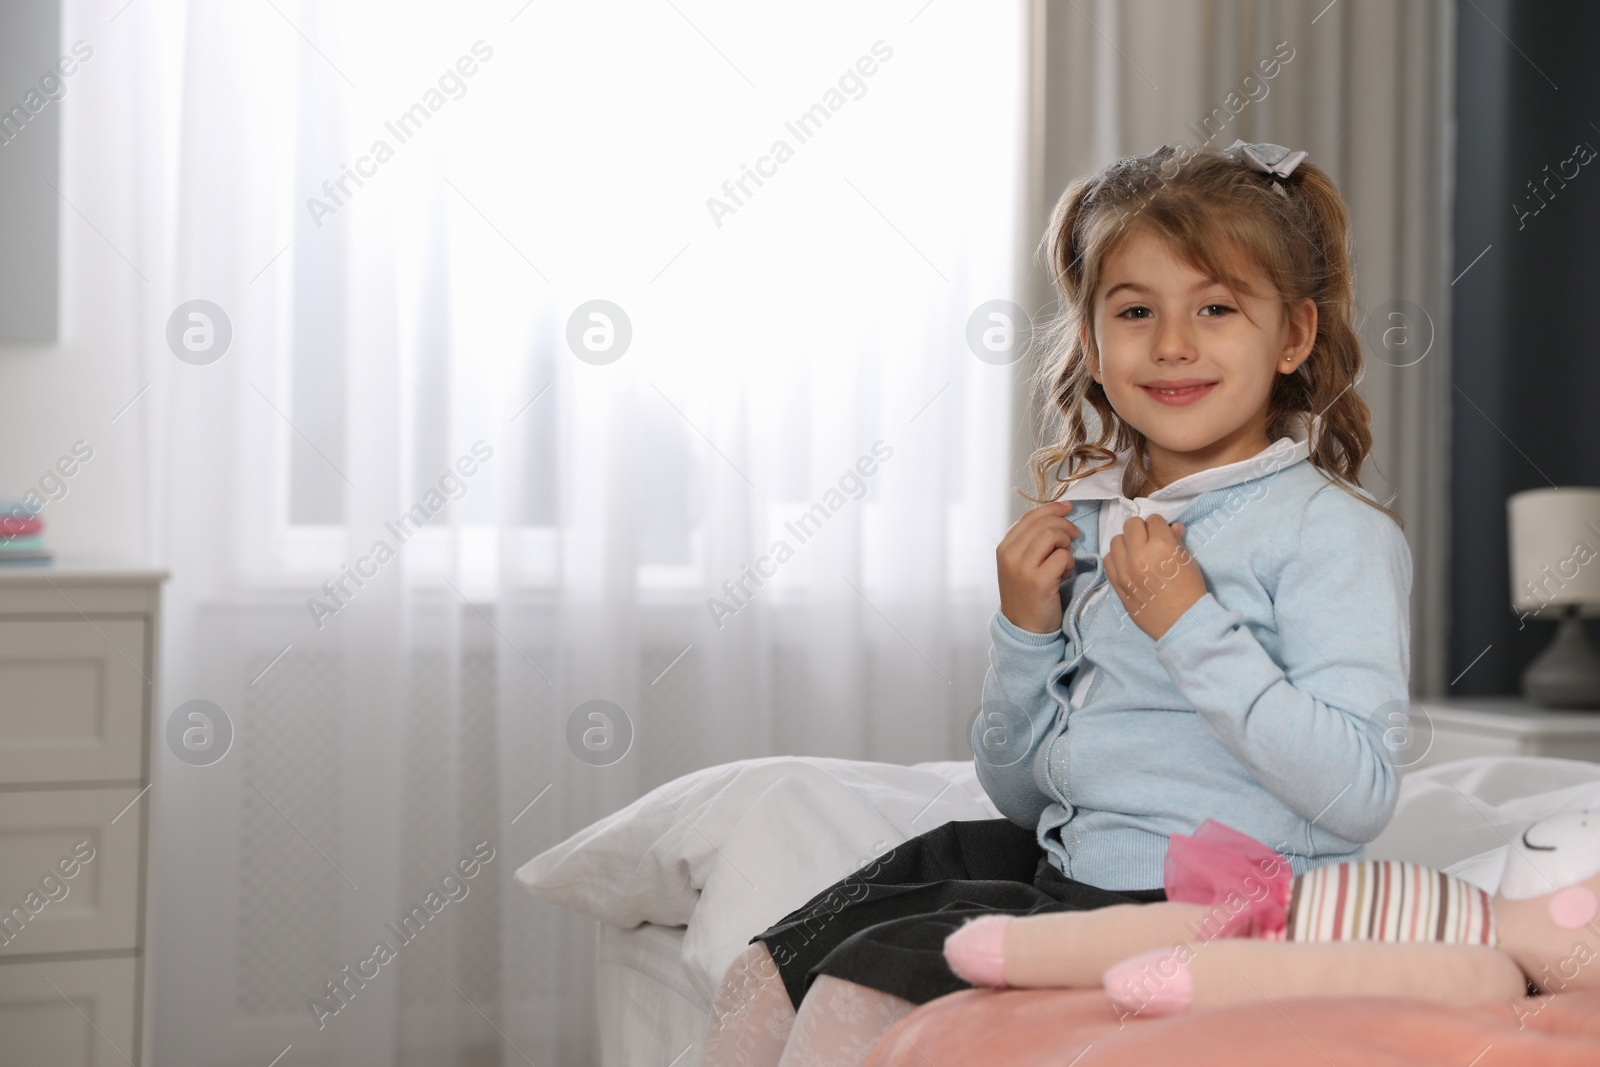 Photo of Little girl getting ready for school in bedroom